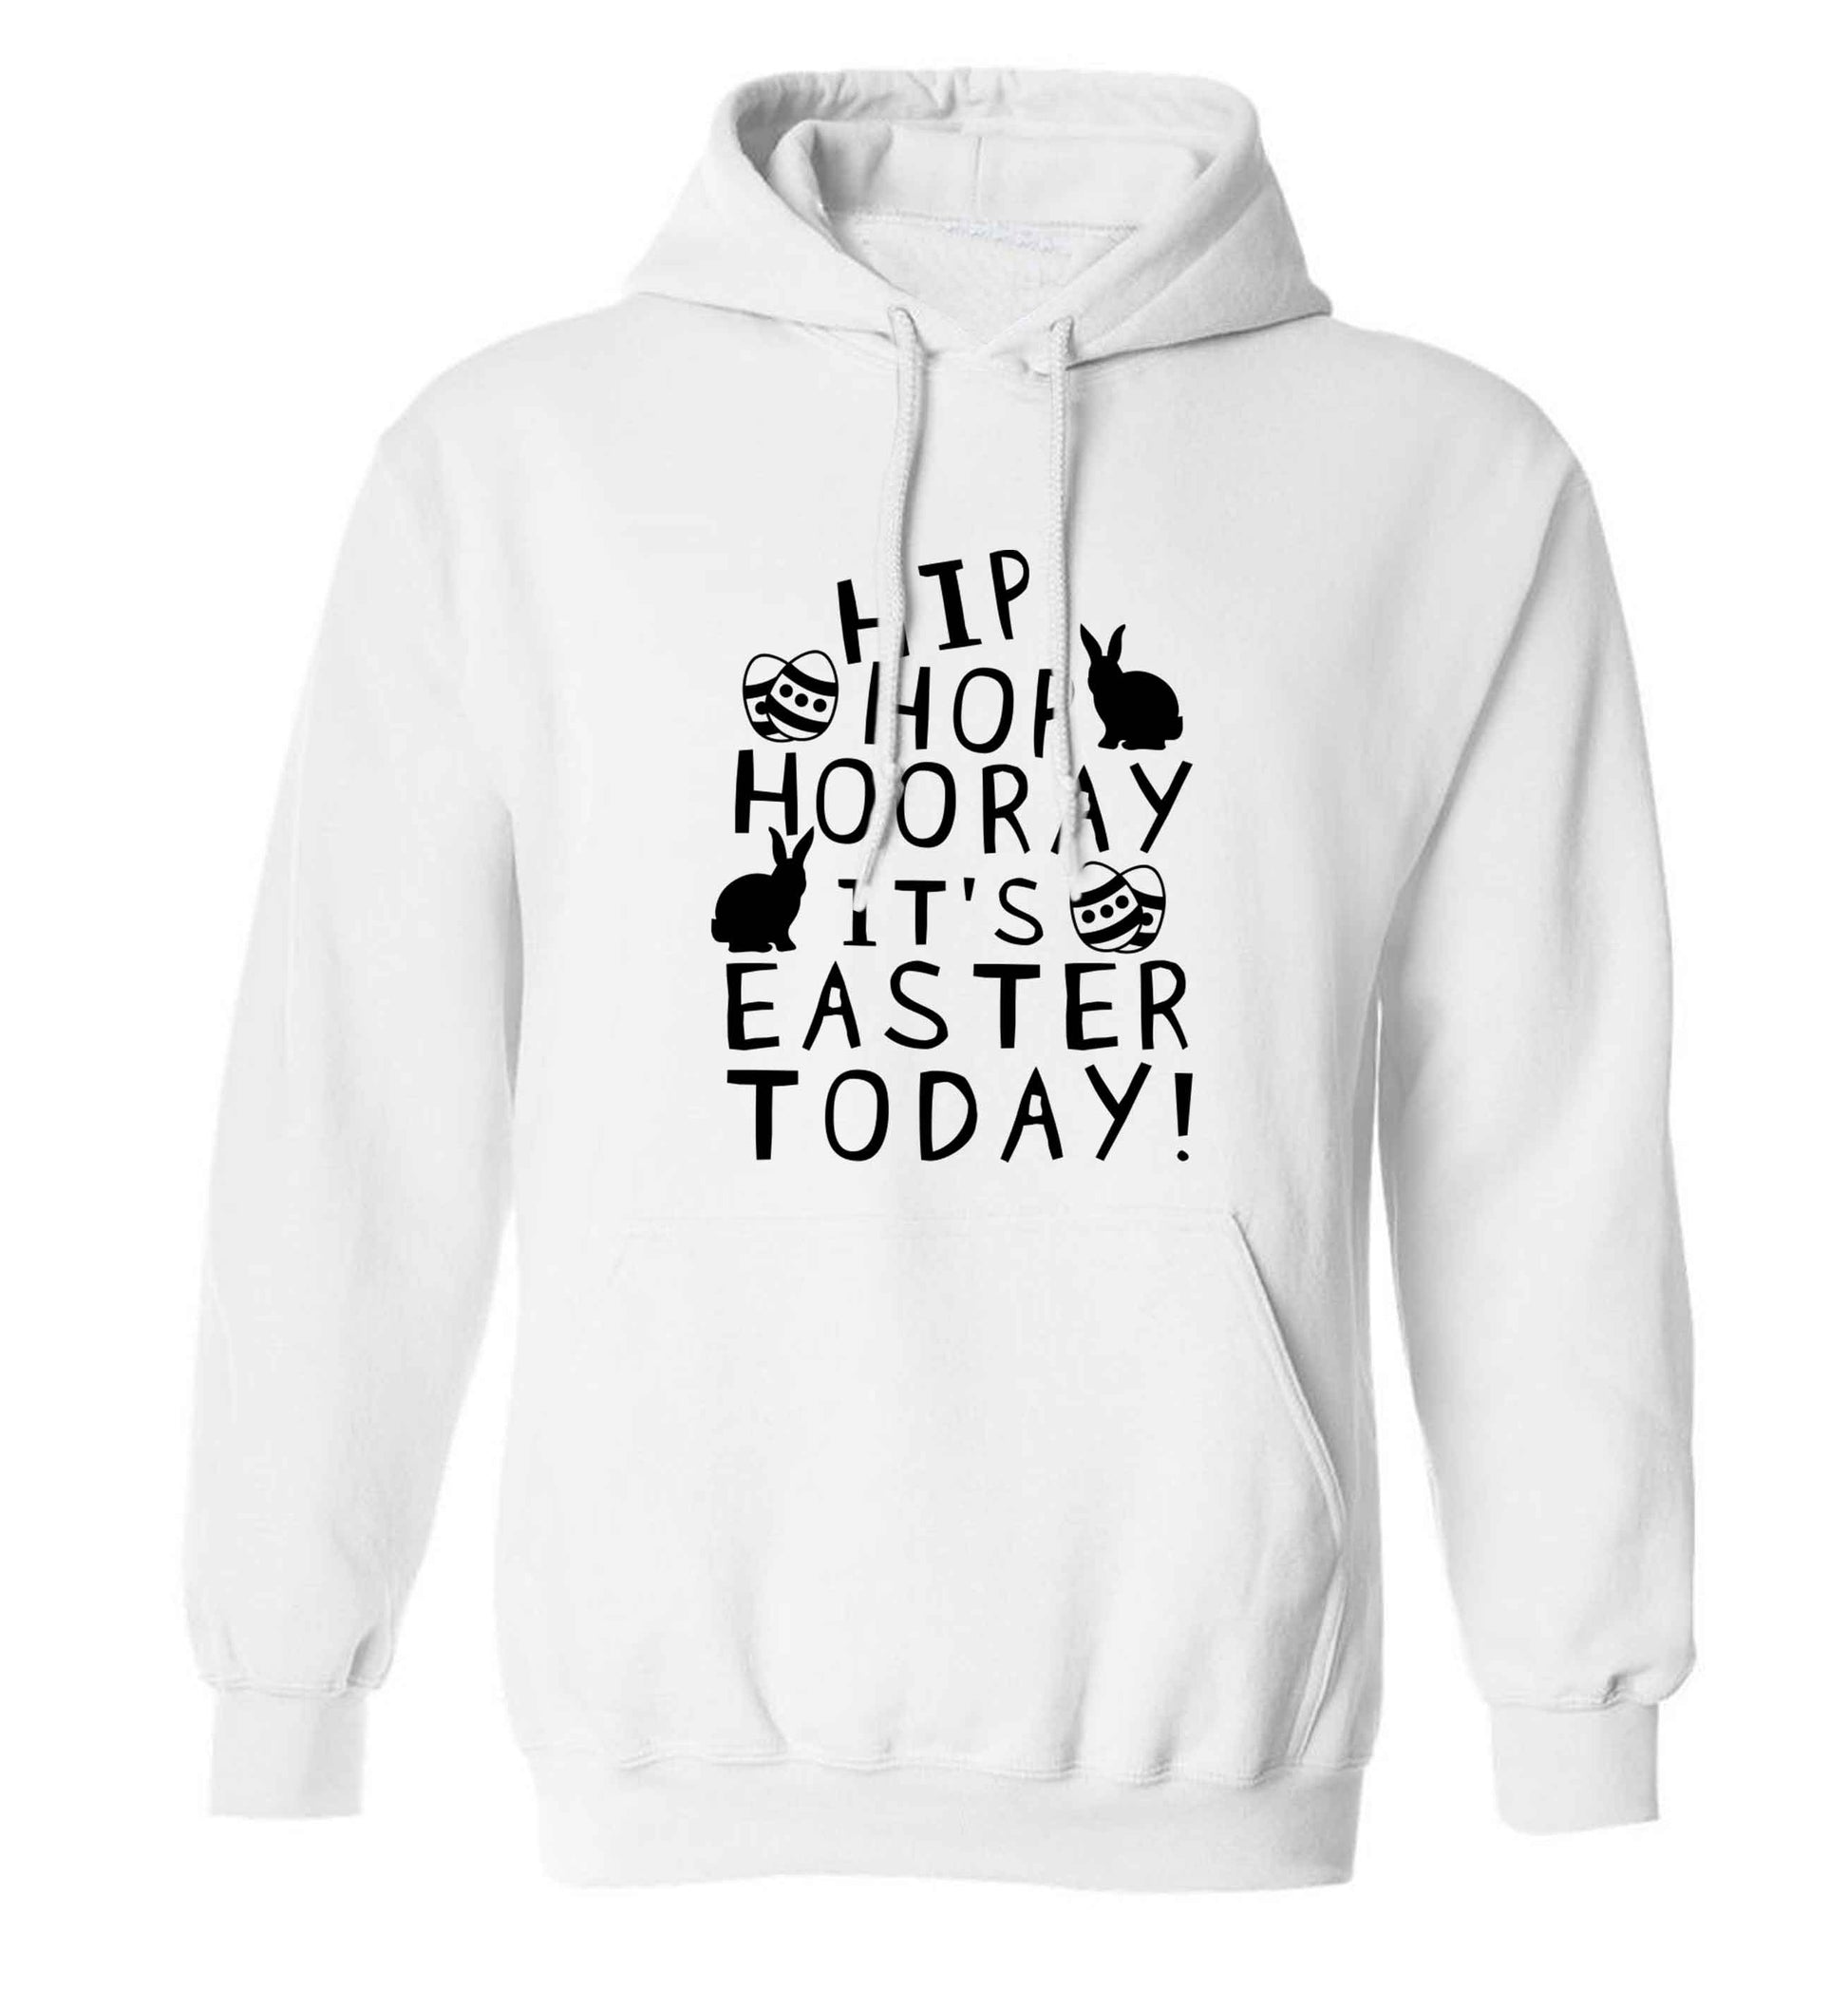 Hip hip hooray it's Easter today! adults unisex white hoodie 2XL